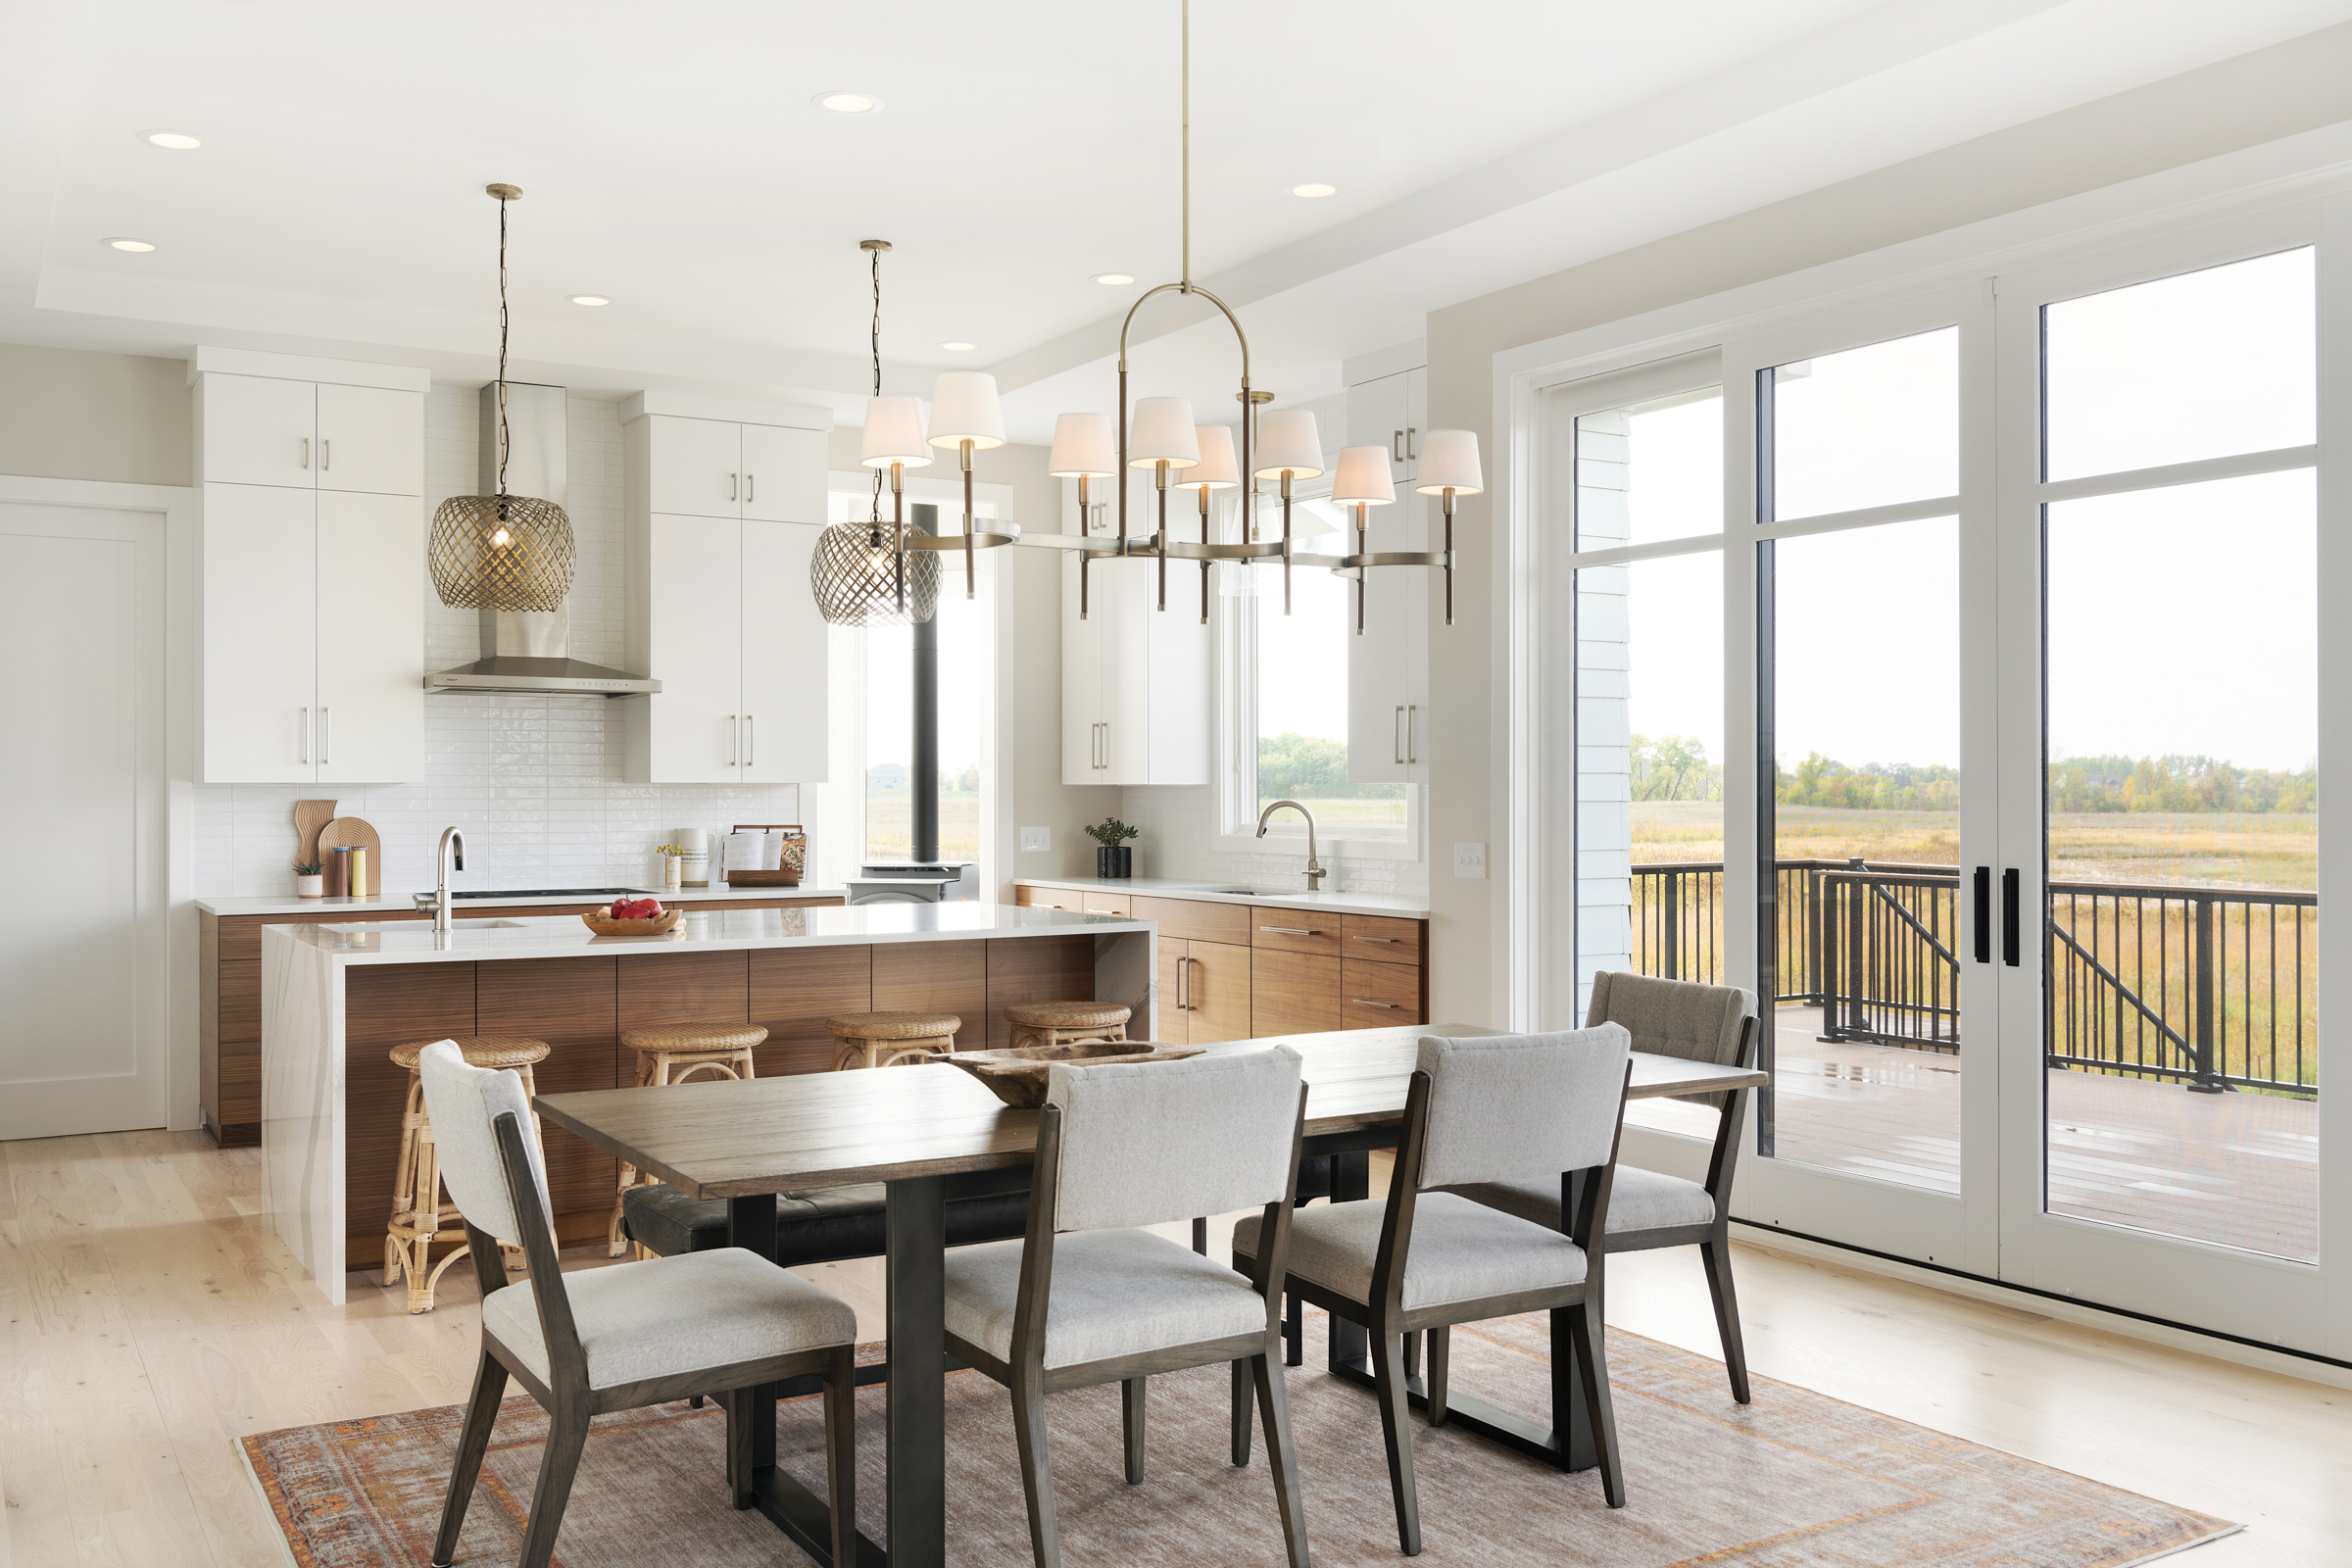 A custom kitchen in a prairie transitional home, complete with a spacious dining table and chairs.